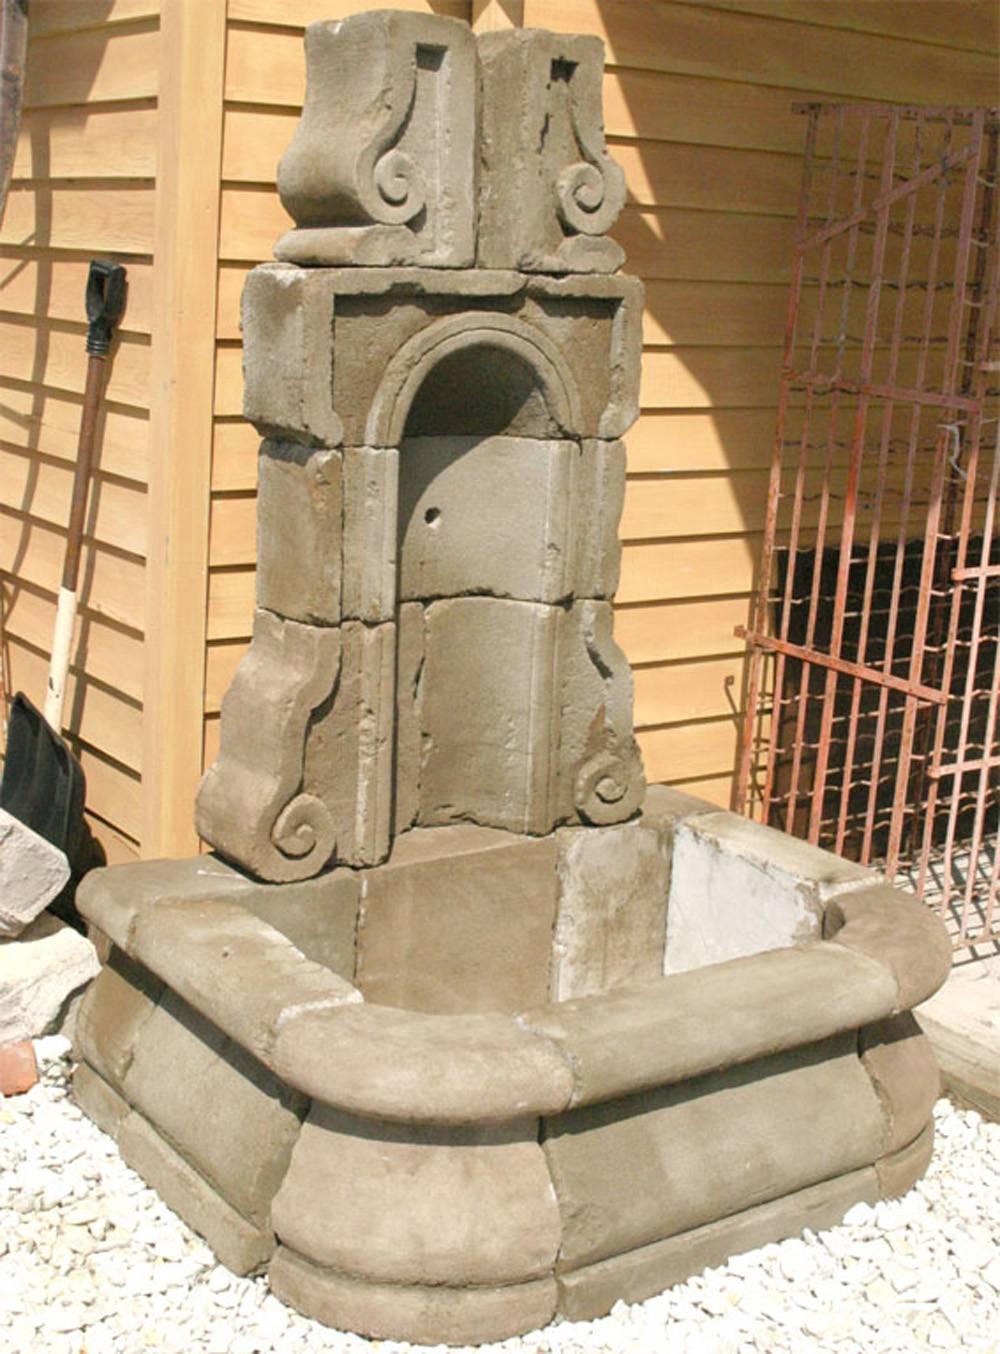 Cast from an original 19th century French fountain.